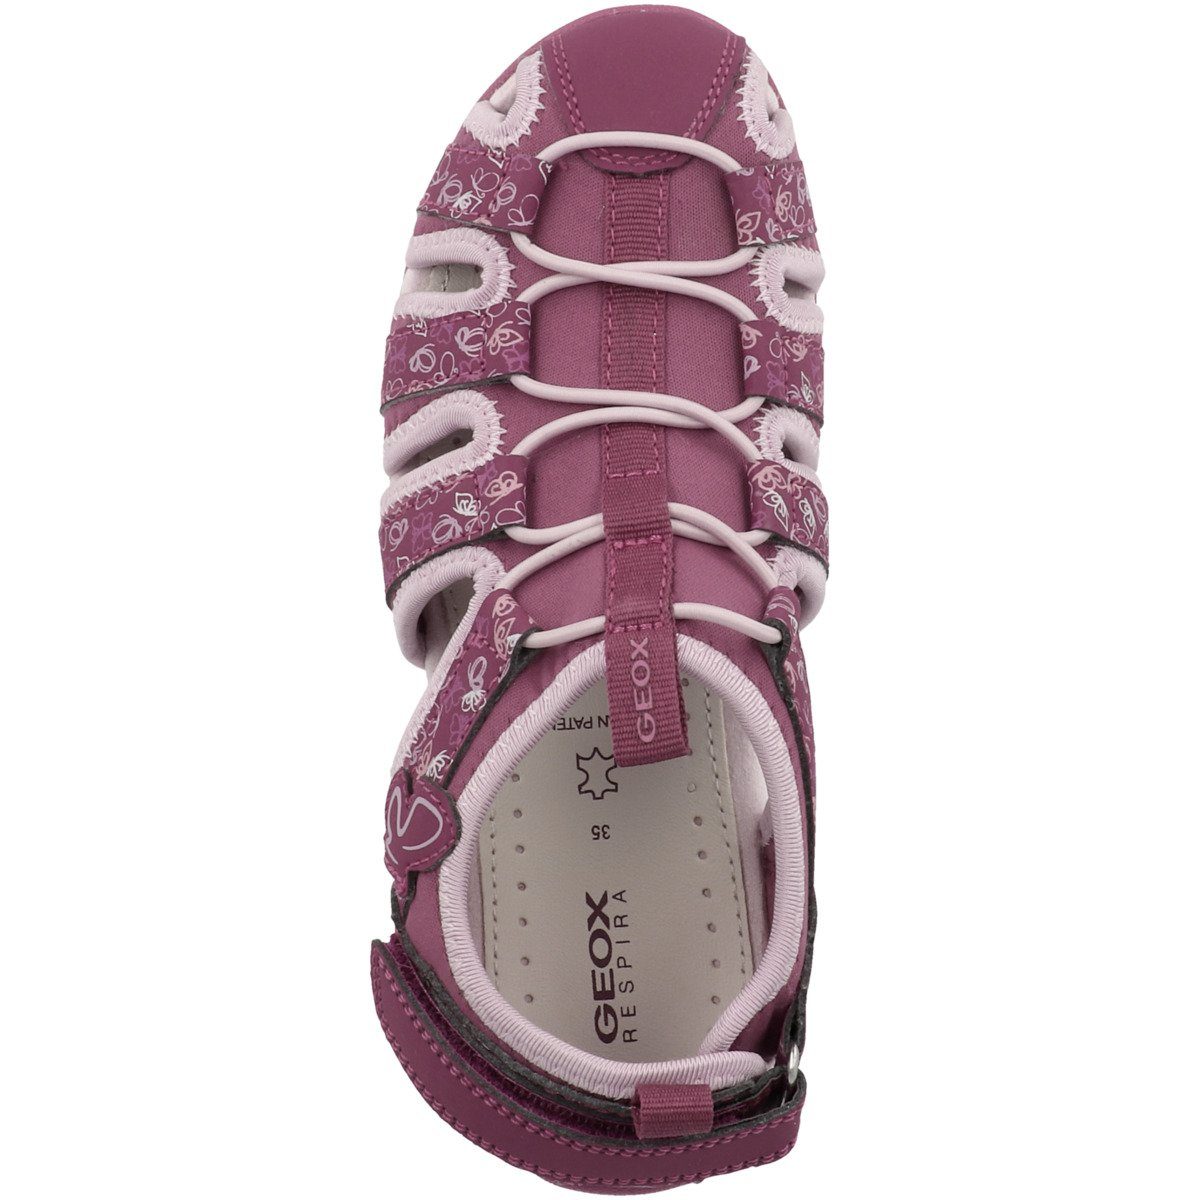 Geox J S. Whinberry Sandale G.A Mädchen pink